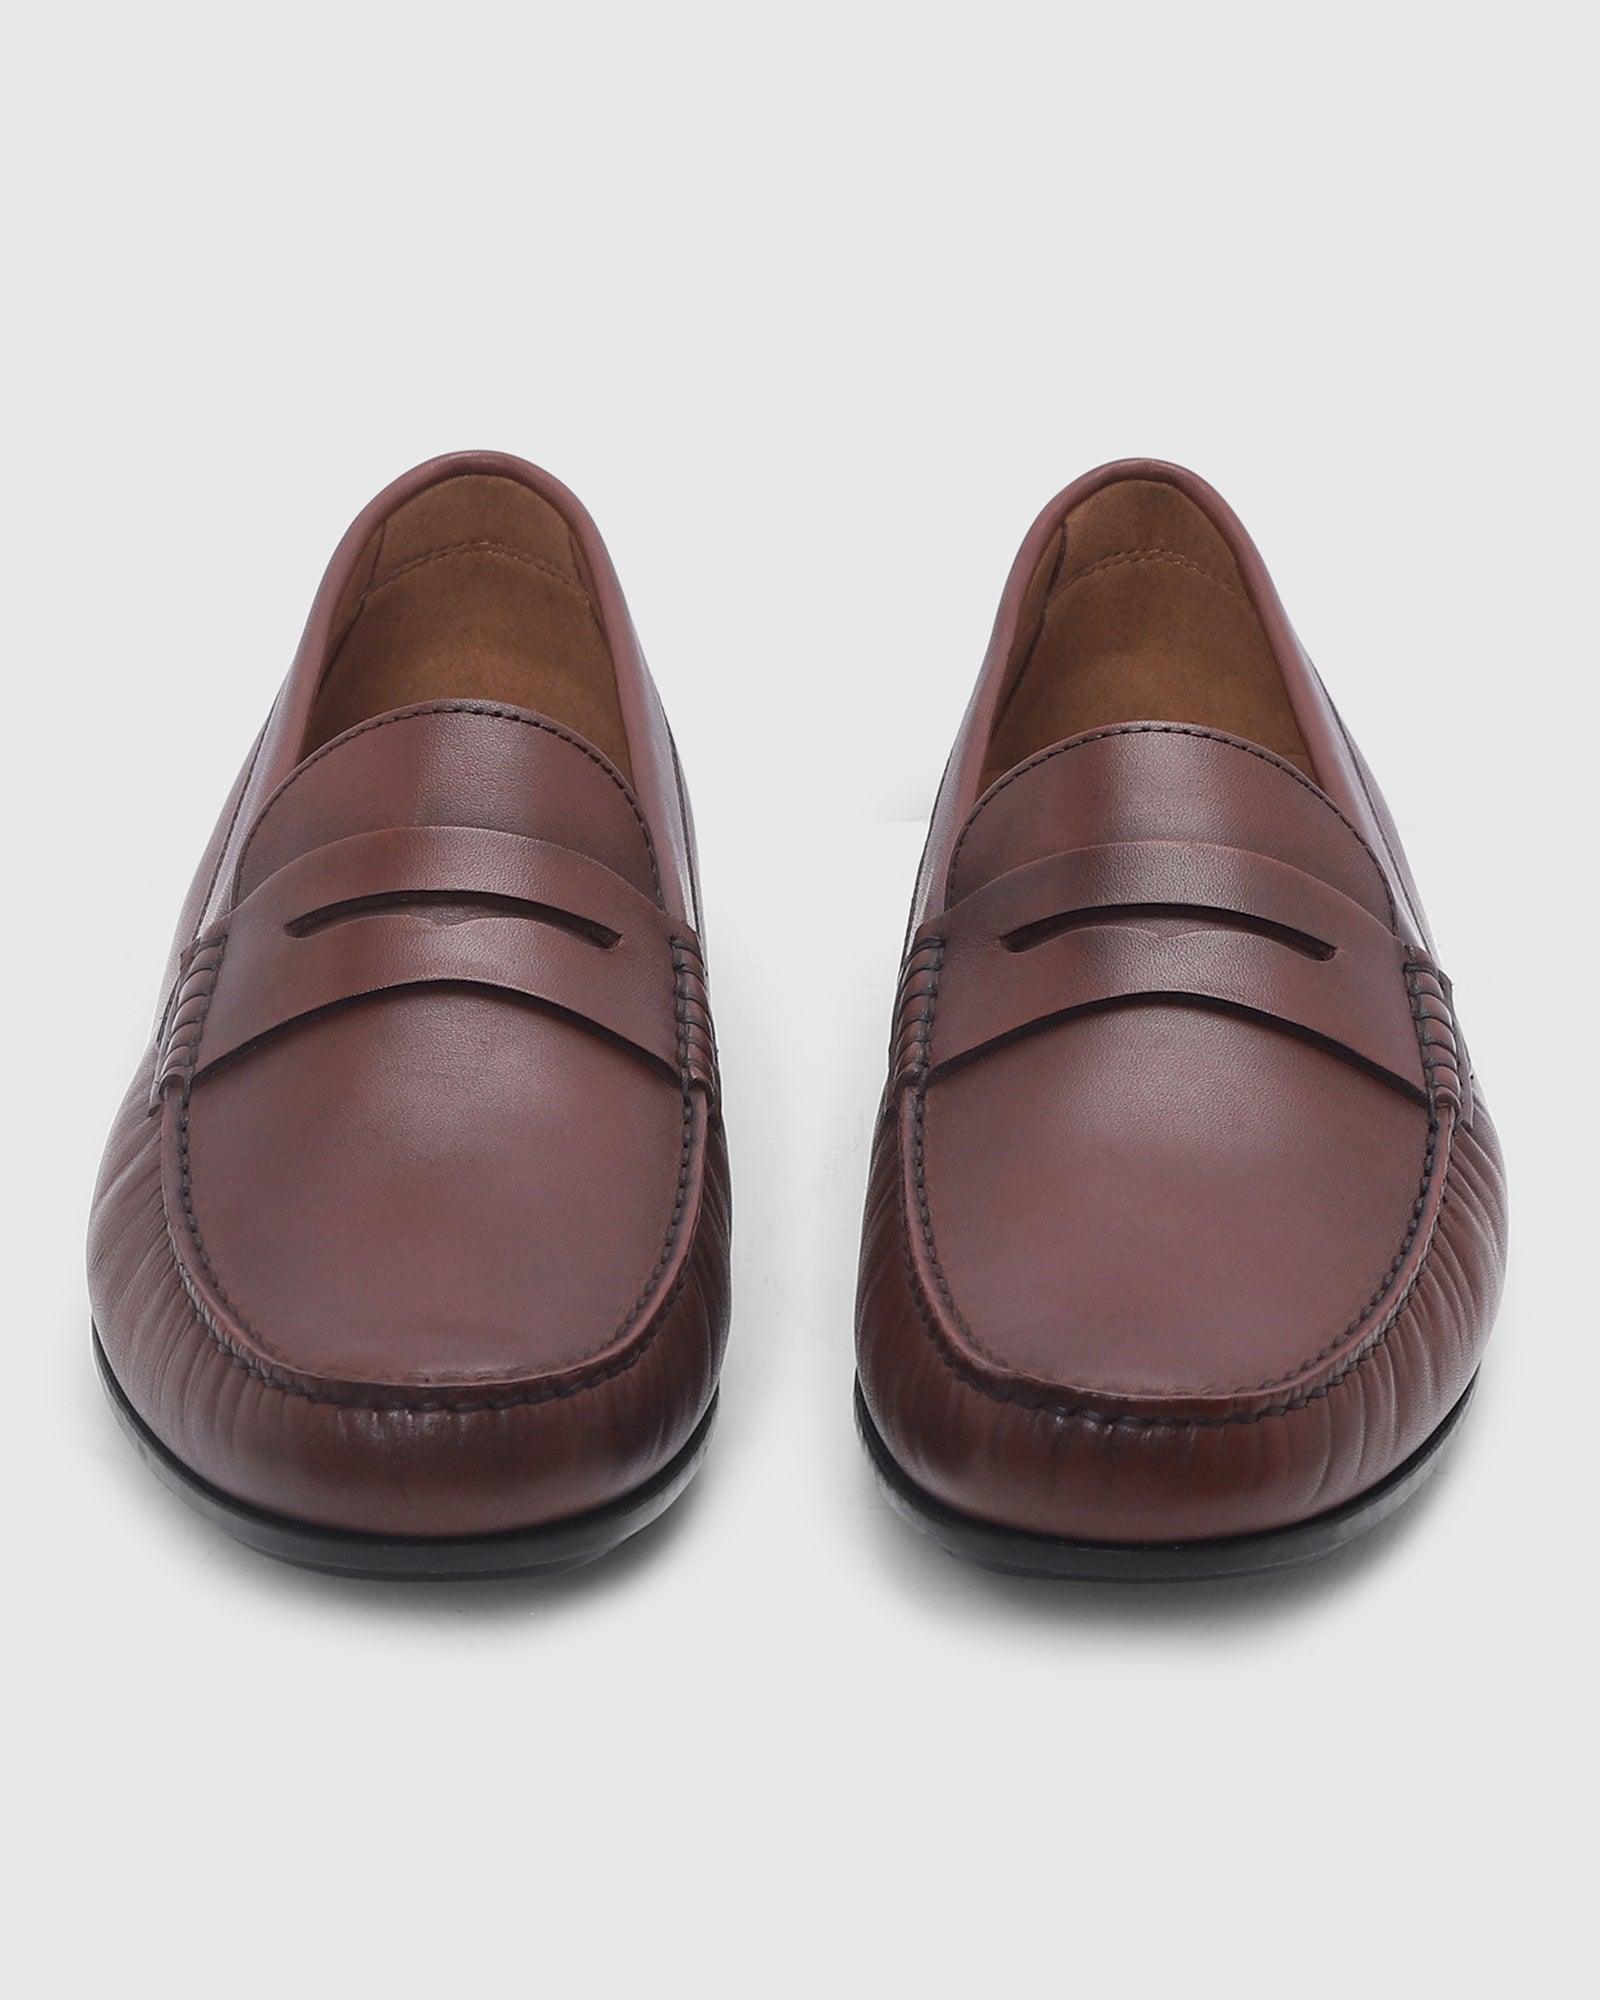 Leather Casual Brown Solid Loafers Shoes - Park